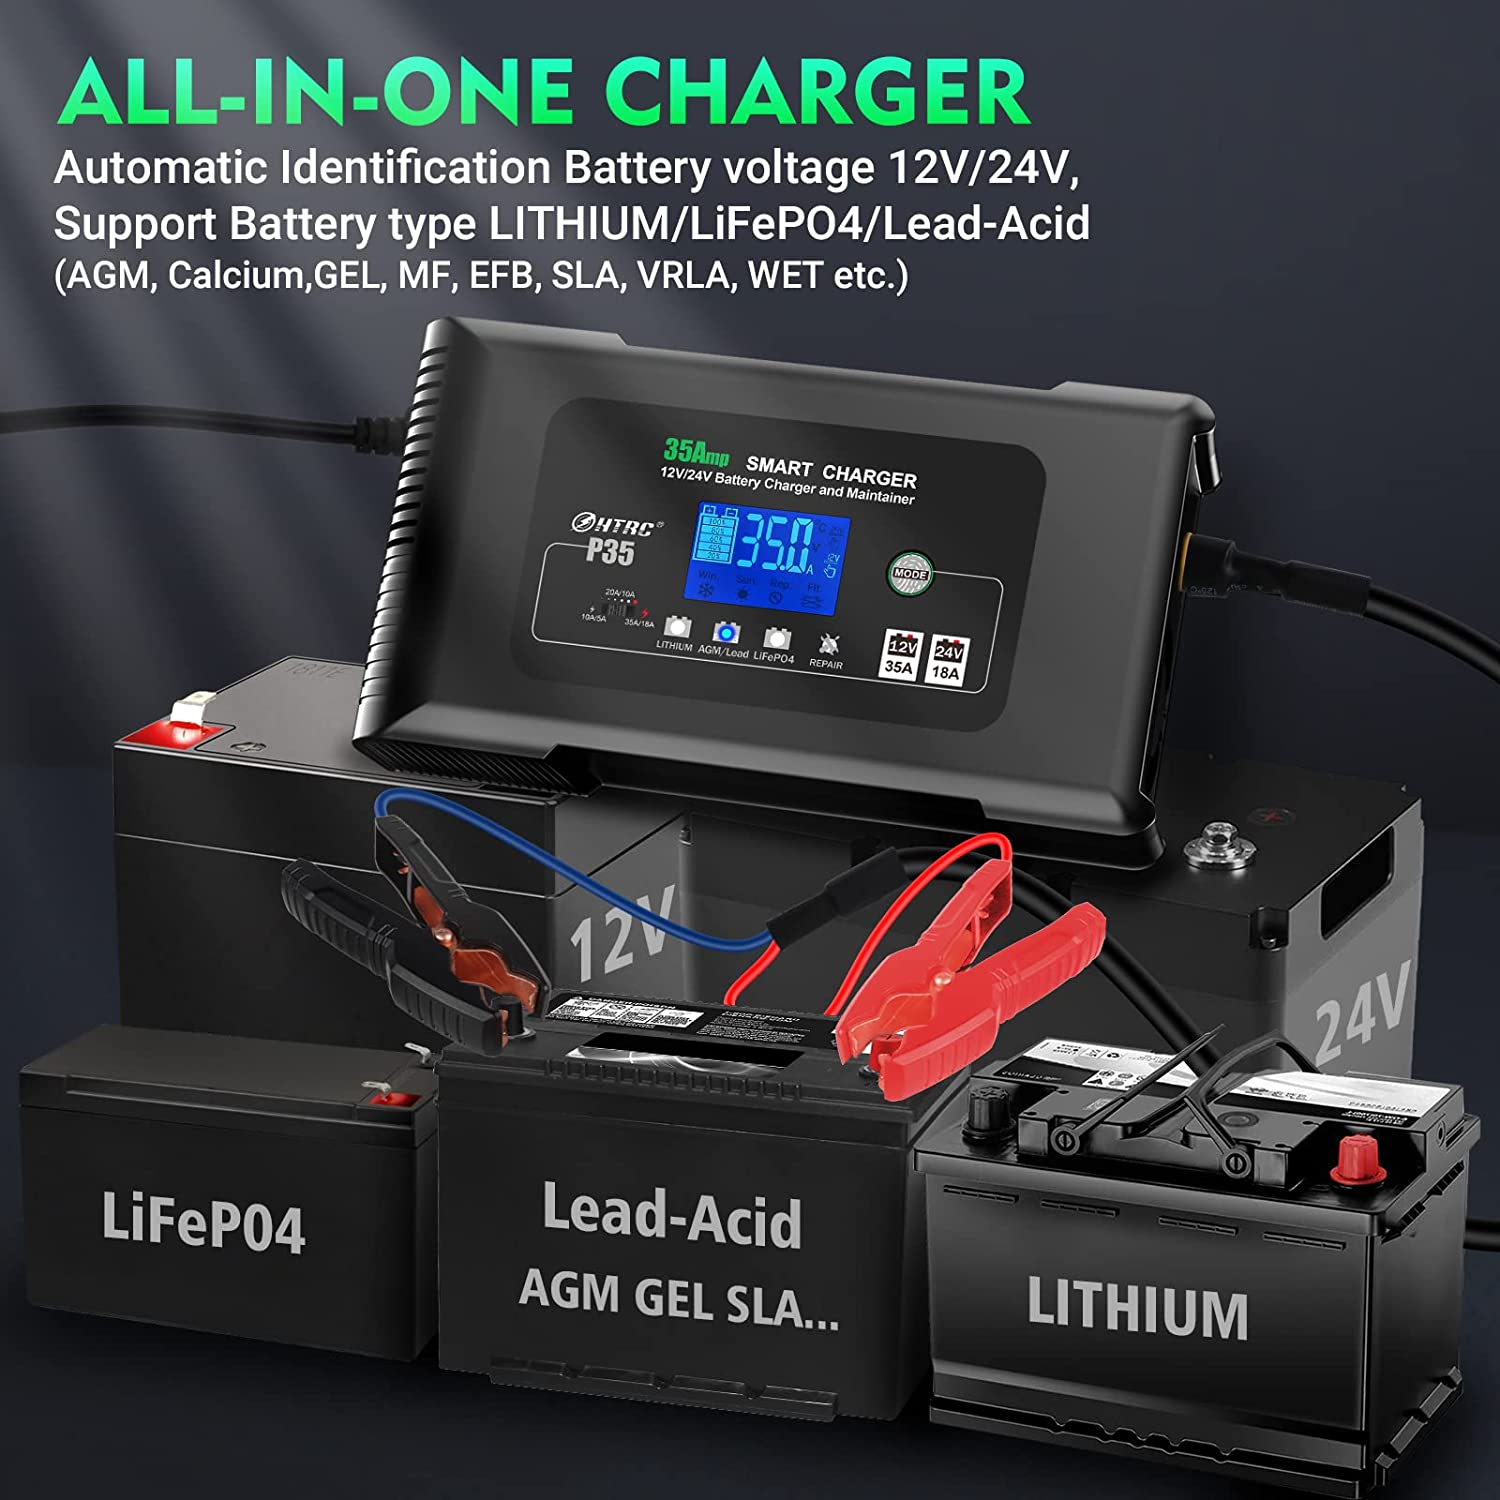  25 Amp Lithium Battery Charger, 12V and 24V  Lifepo4,Lead-Acid(AGM/Gel/SLA..) Battery Charger,Battery Maintainer,  Trickle Charger, and Battery Desulfator for Car,Boat,Motorcycle, Lawn  Mower. : Automotive